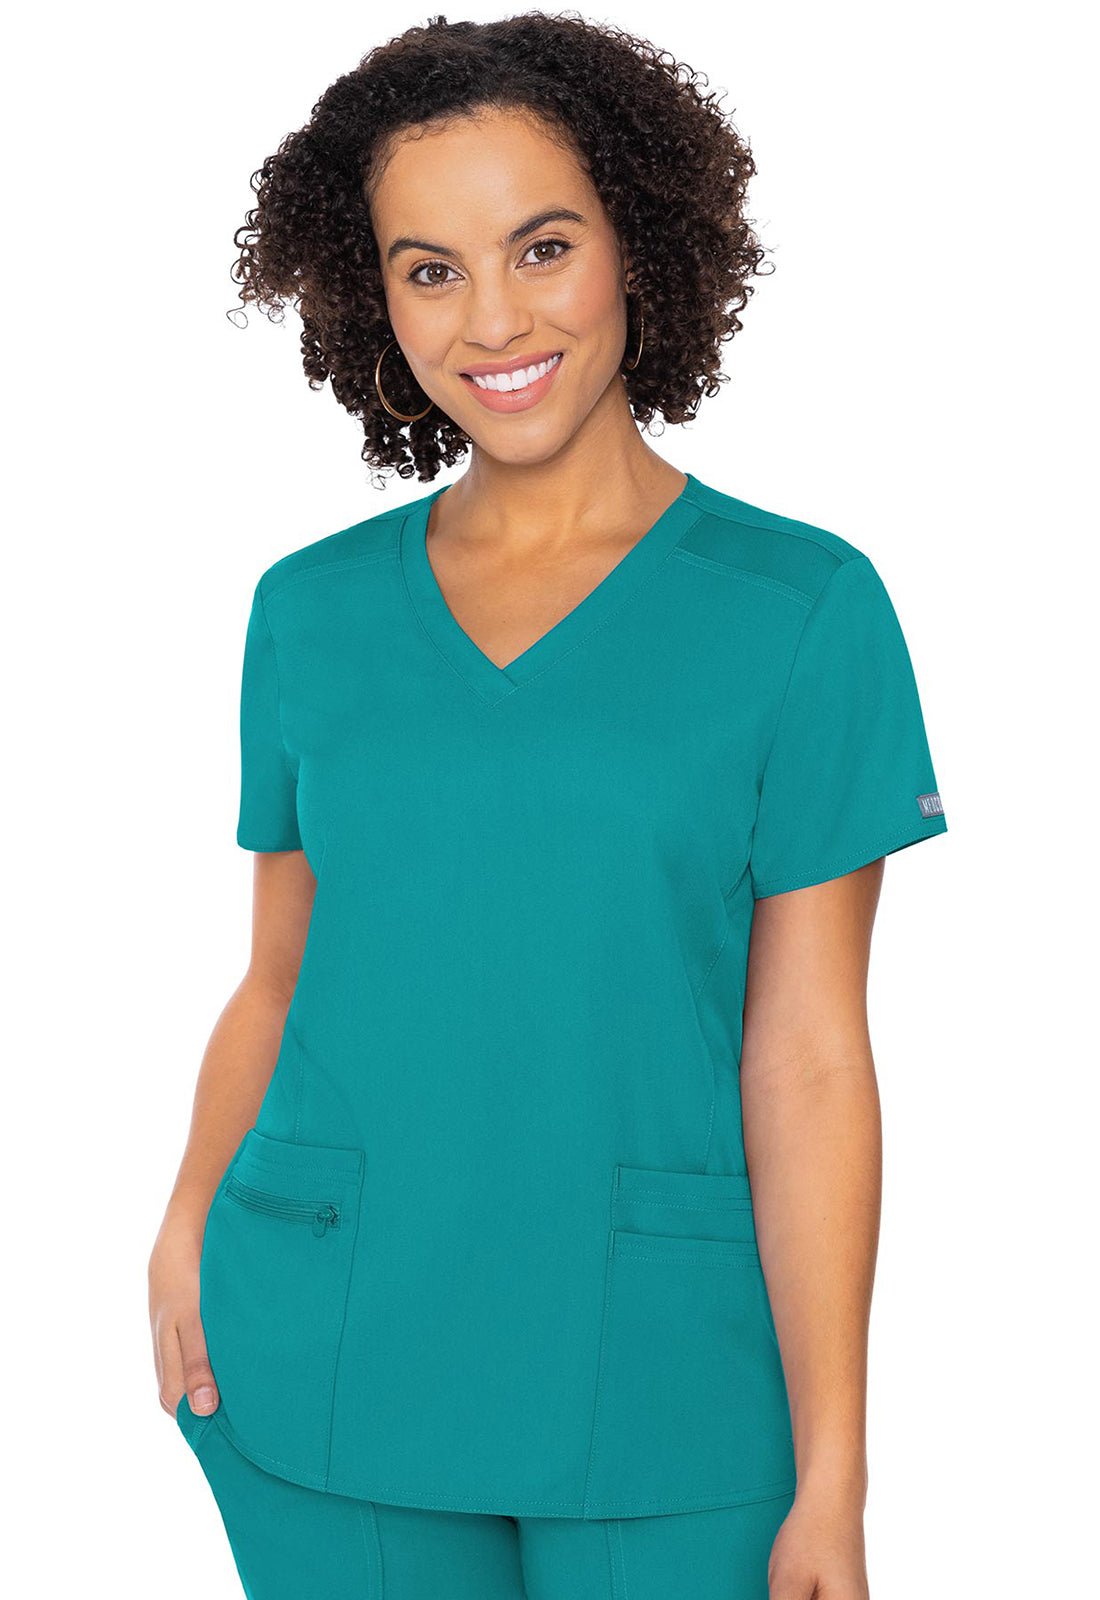 Med Couture Touch V Neck Scrub Top MC7468 in Coral, Hunter, Slate, Teal, Wine - Scrubs Select